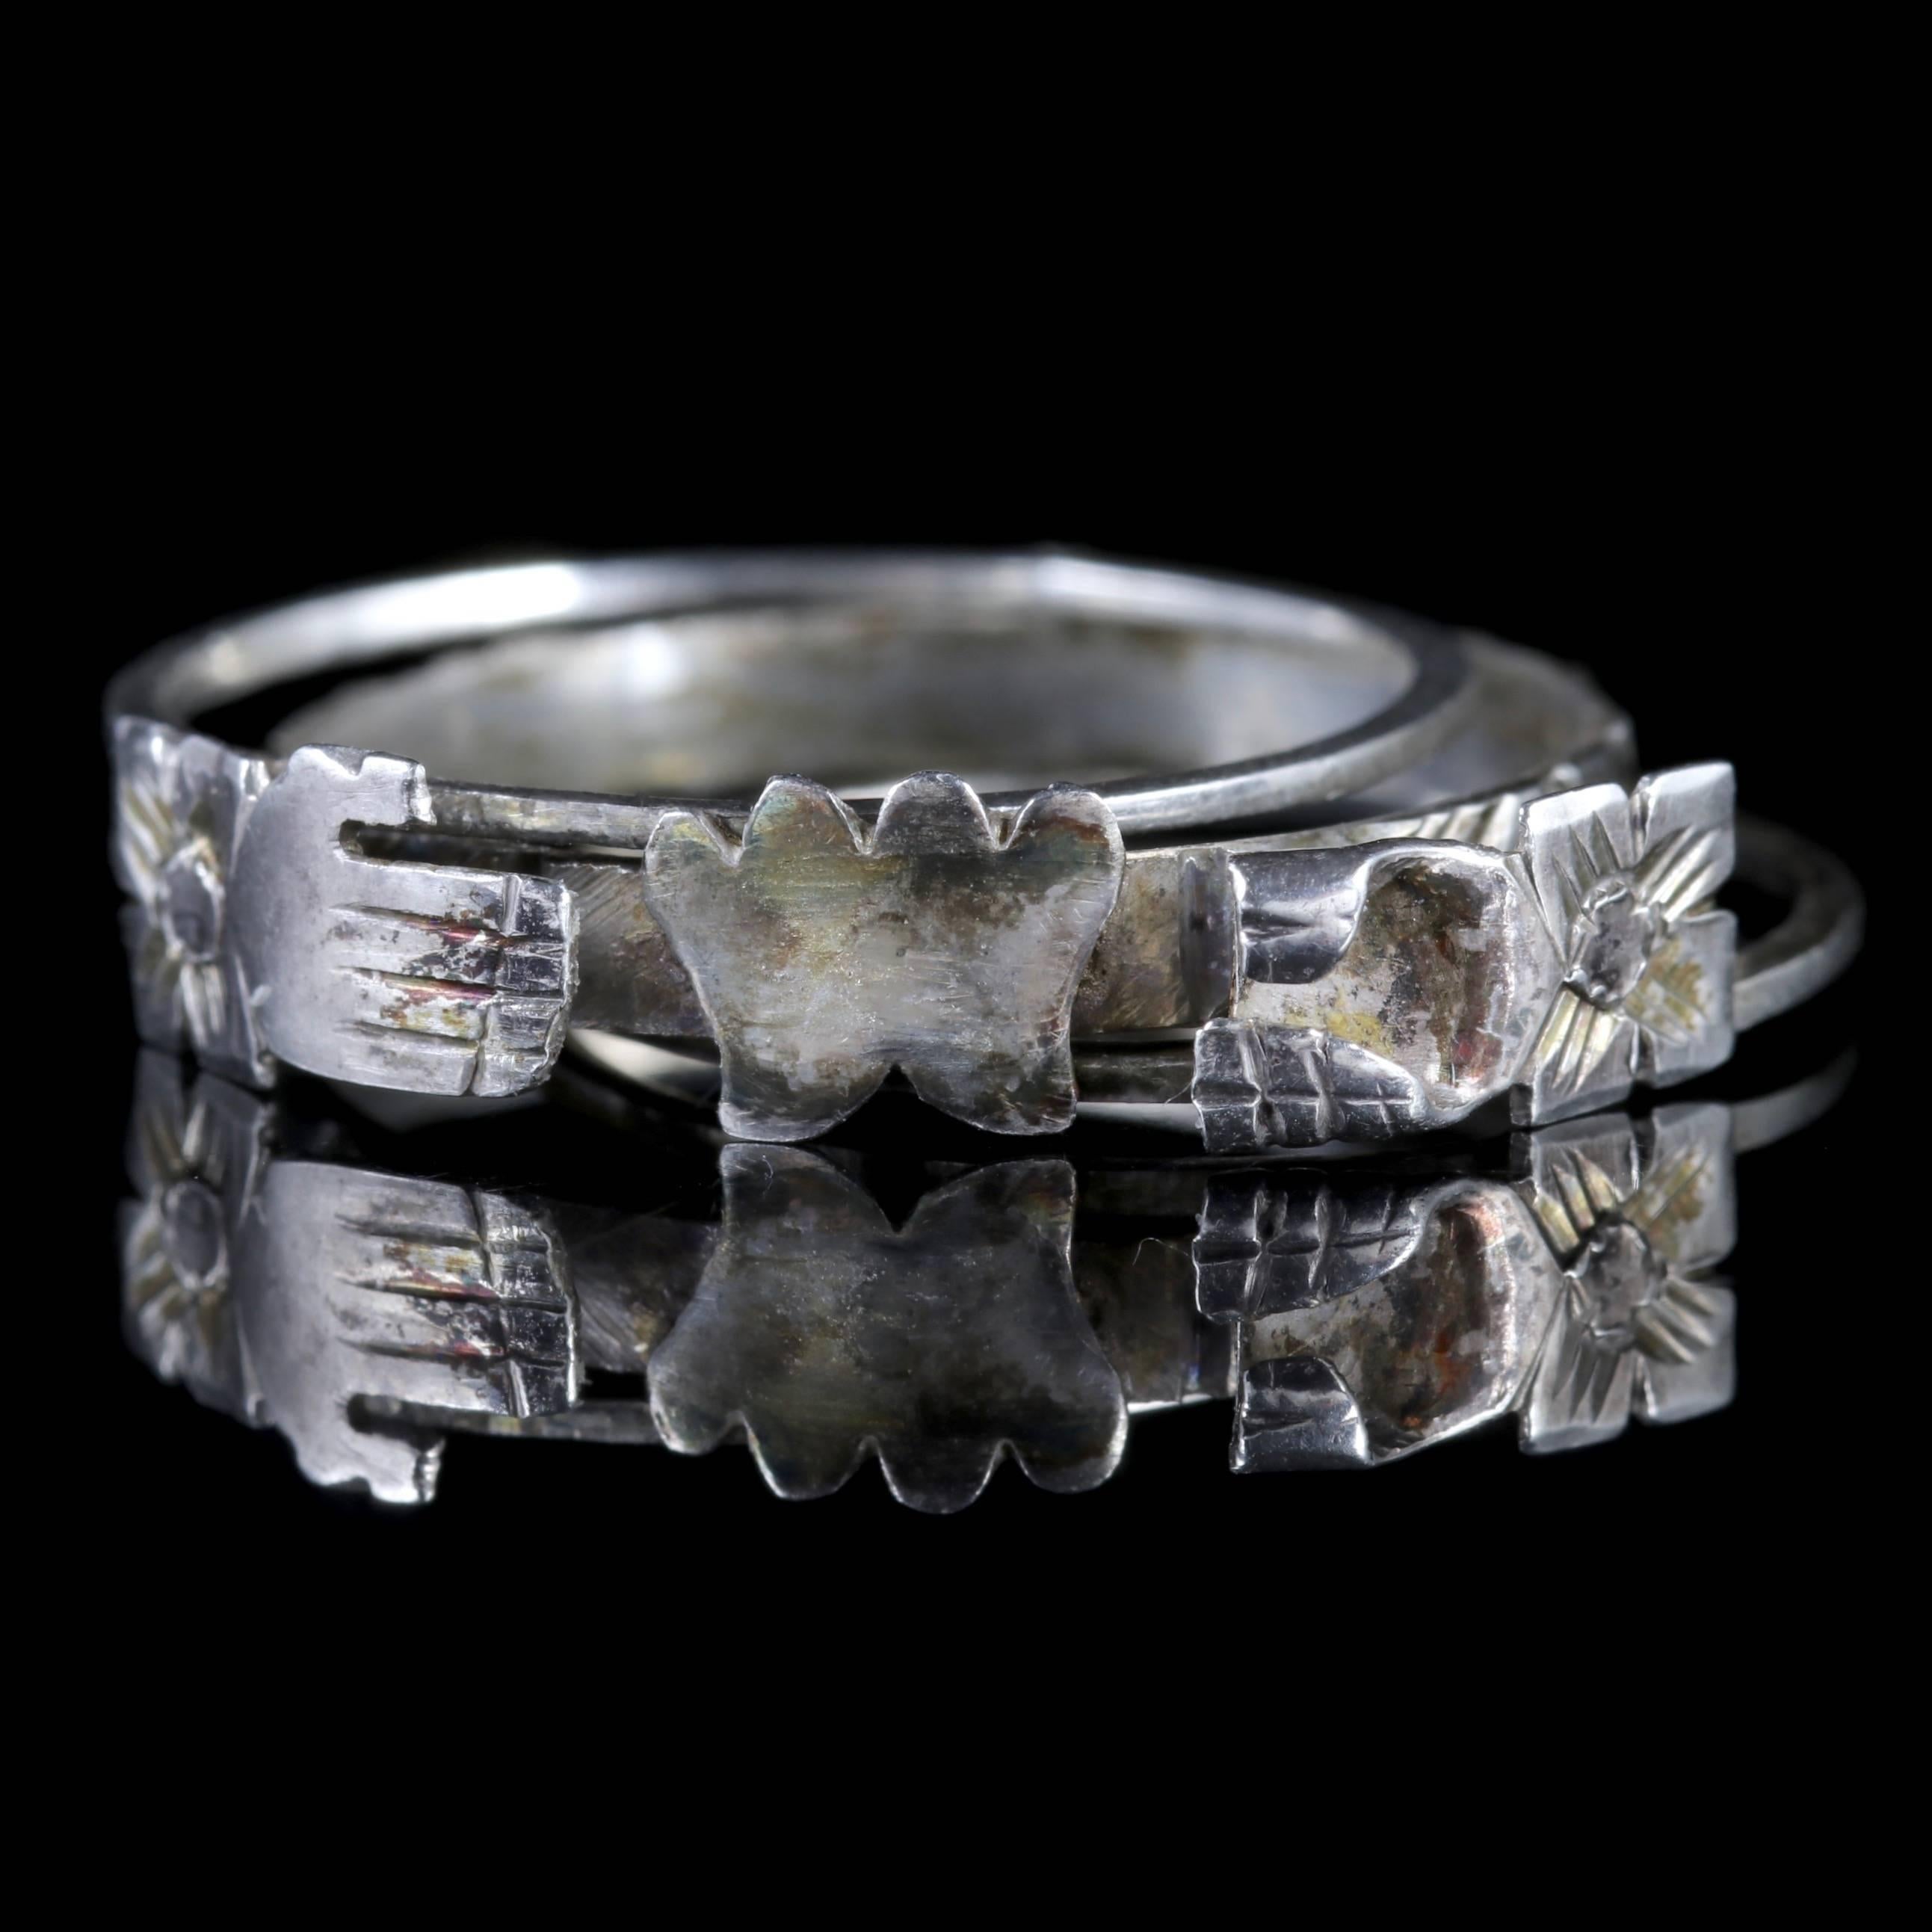 To read more please click continue reading below-

This wonderful rare antique Silver Fede ring is a genuine Georgian piece Circa 1780. 

Due to its age, Georgian jewellery is quite rare, with some pieces almost three hundred years old. This